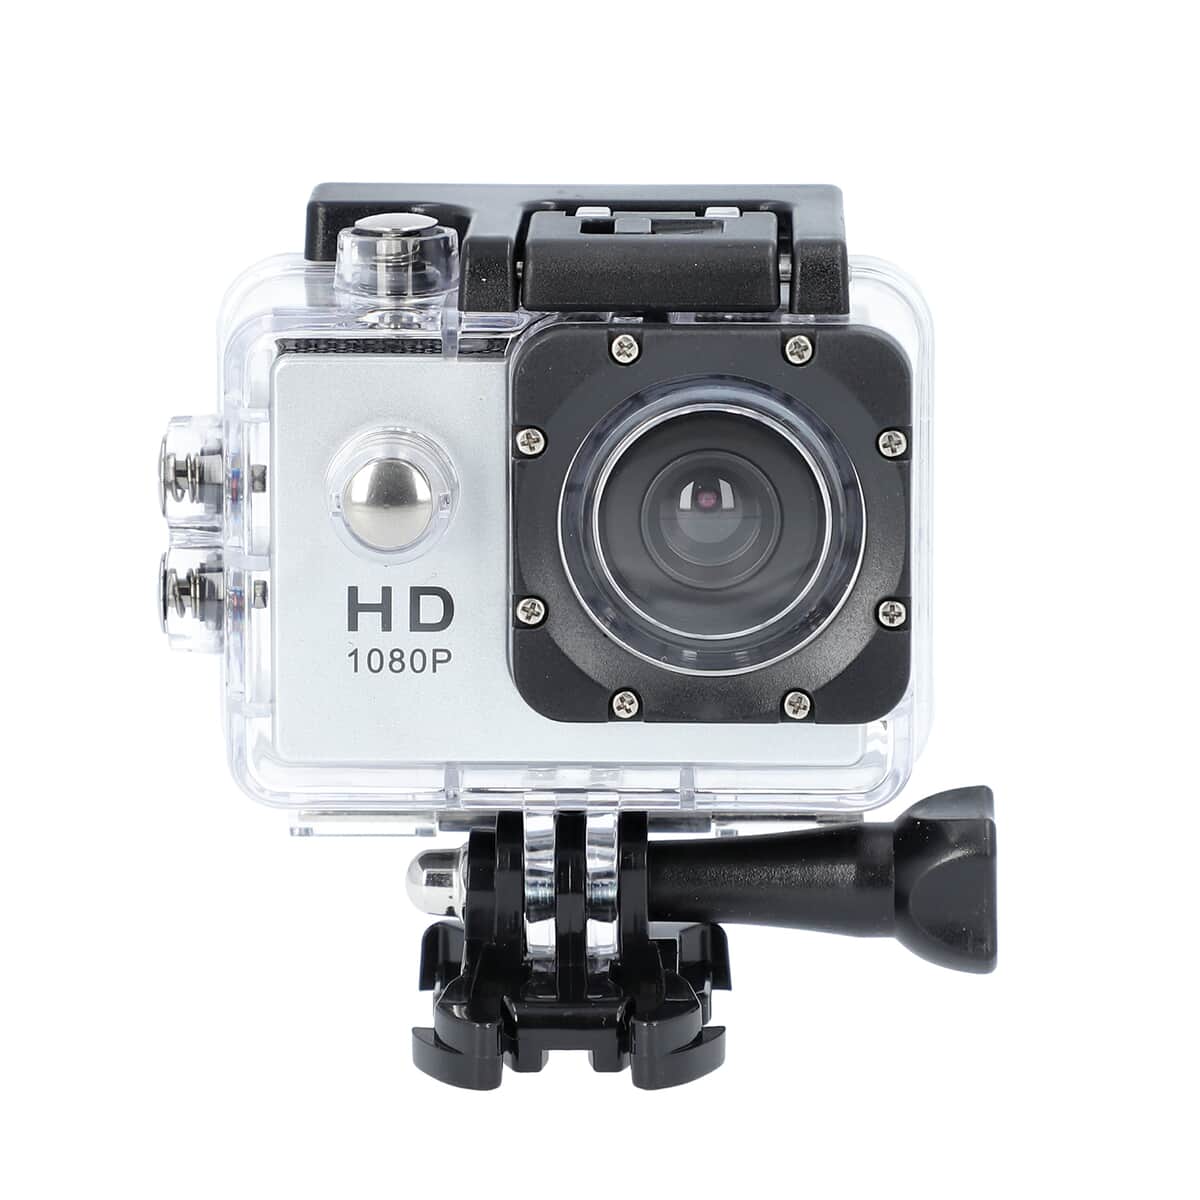 Waterproof 1080P Action Camera with 8GB TF Cards - White image number 4